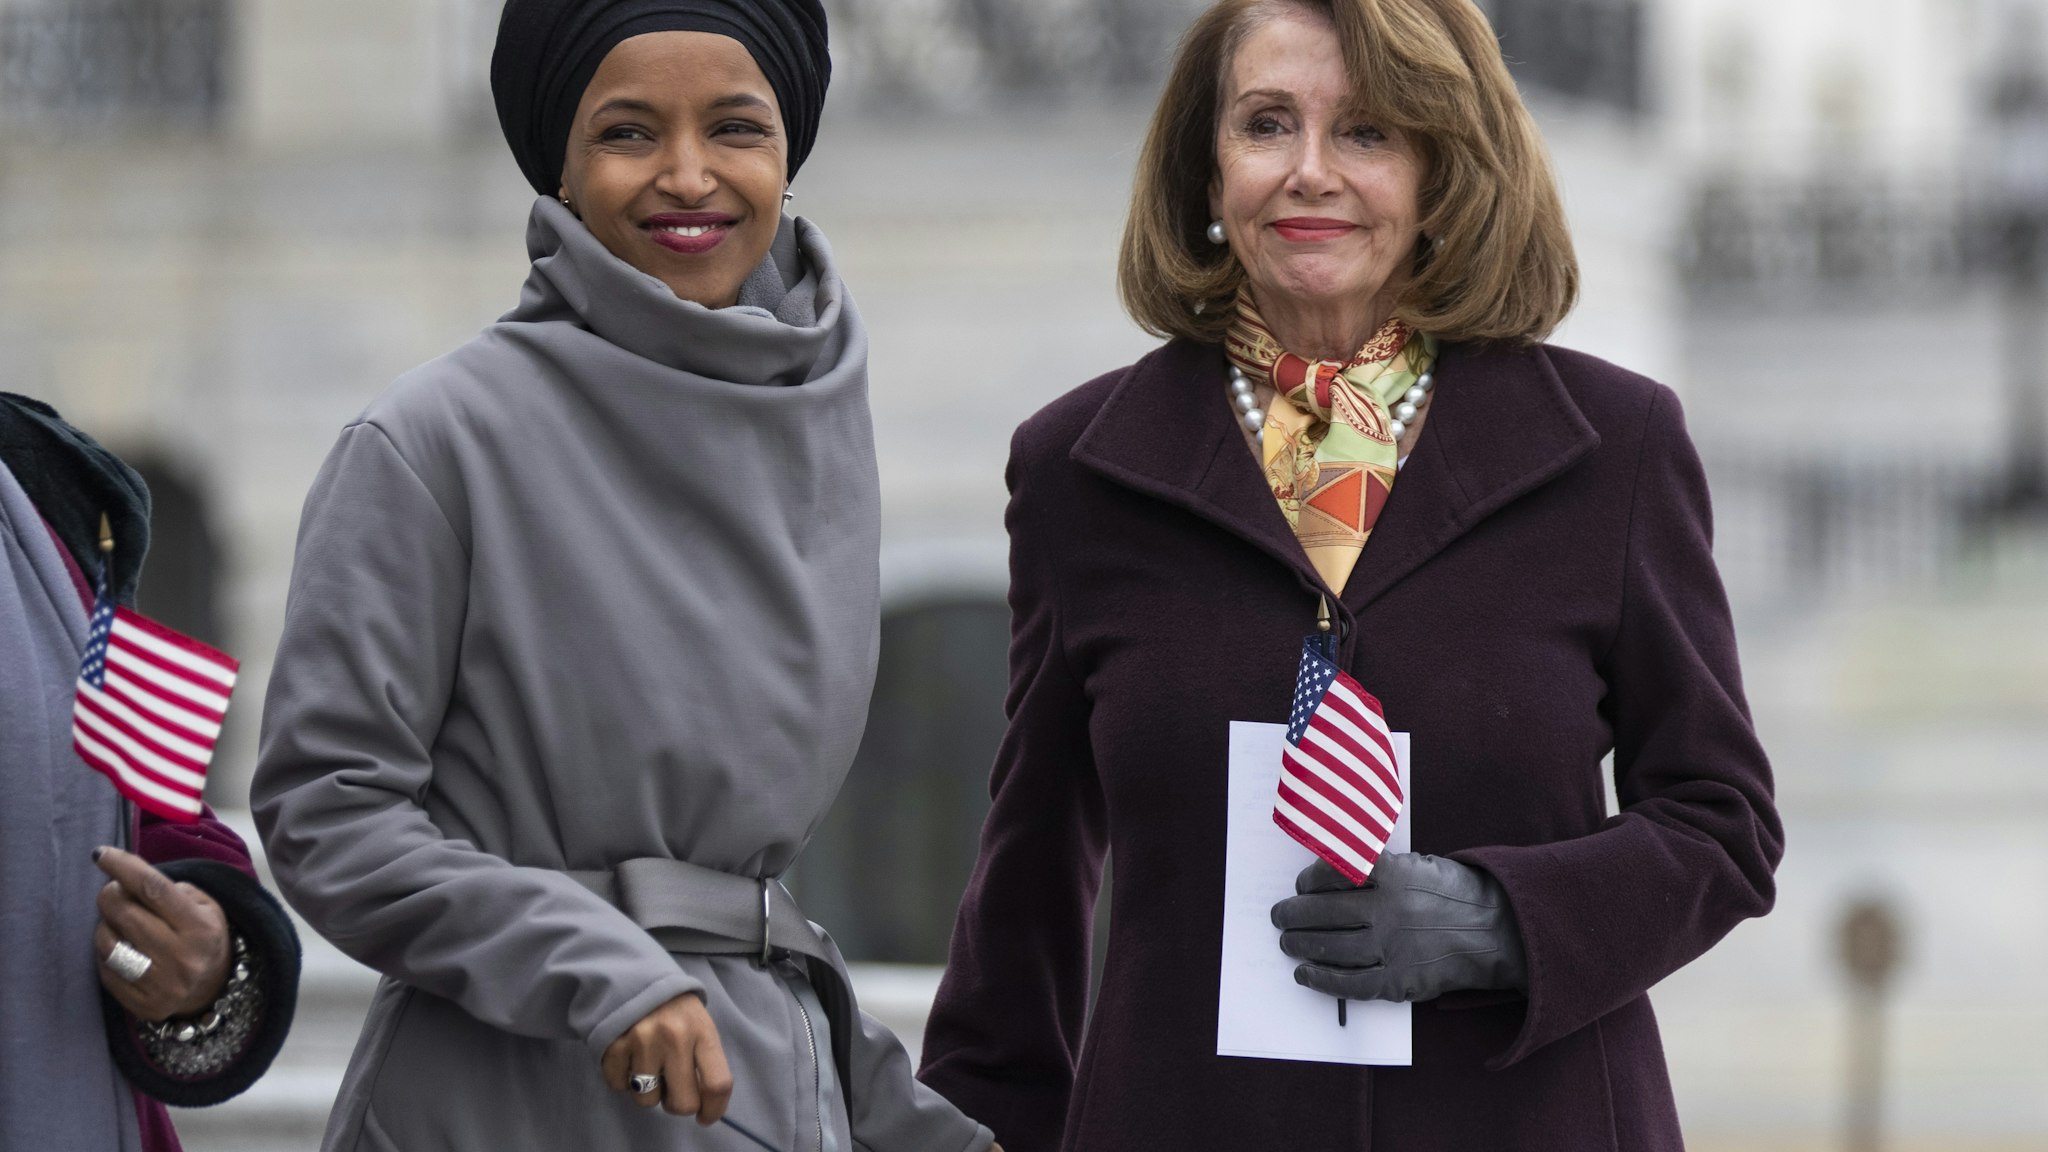 U.S. House Speaker Nancy Pelosi, a Democrat from California, right, and Representative Ilhan Omar, a Democrat from Minnesota, smile during a news conference in Washington, D.C., U.S., on Friday, March 8, 2019. House Democrats are set to approve H.R. 1, a far-reaching elections and ethics bill that would change the way congressional elections are funded, impose new voter-access mandates on states, require groups to publicize donors and force disclosure of presidential candidates' tax returns. Photographer: Alex Edelman/Bloomberg via Getty Images